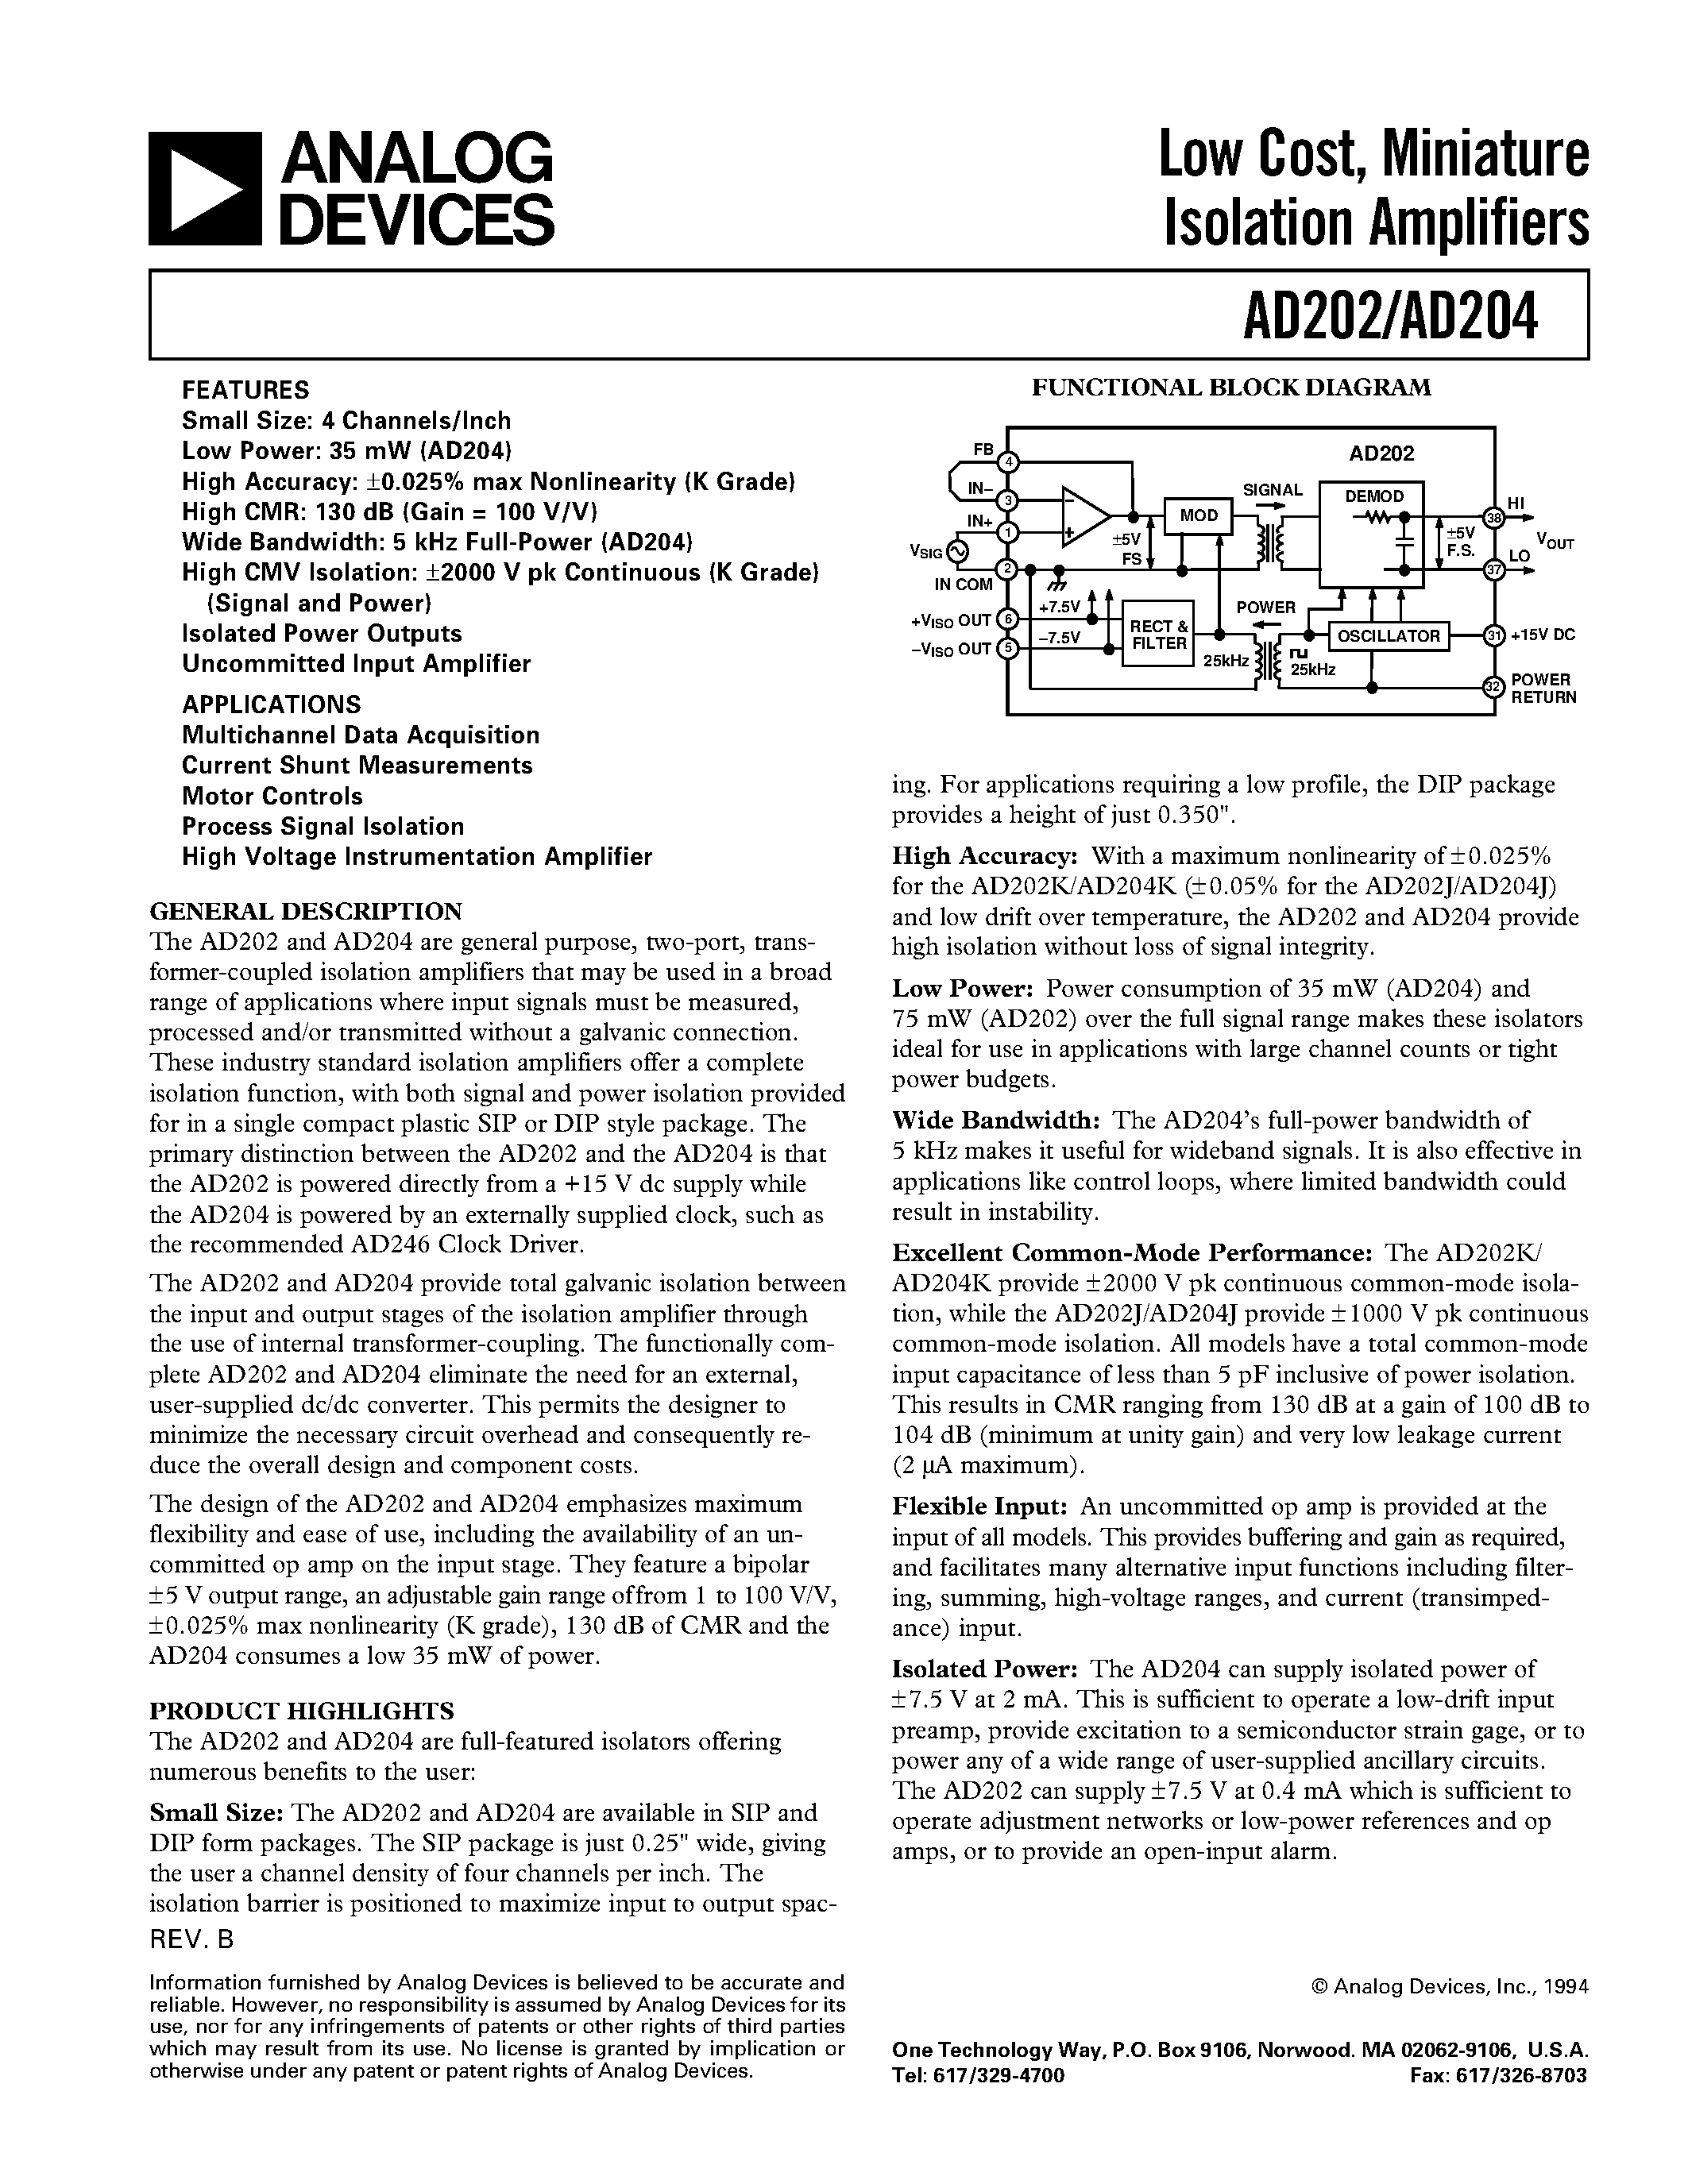 Datasheet AD204J - Low Cost/ Miniature Isolation Amplifiers page 1